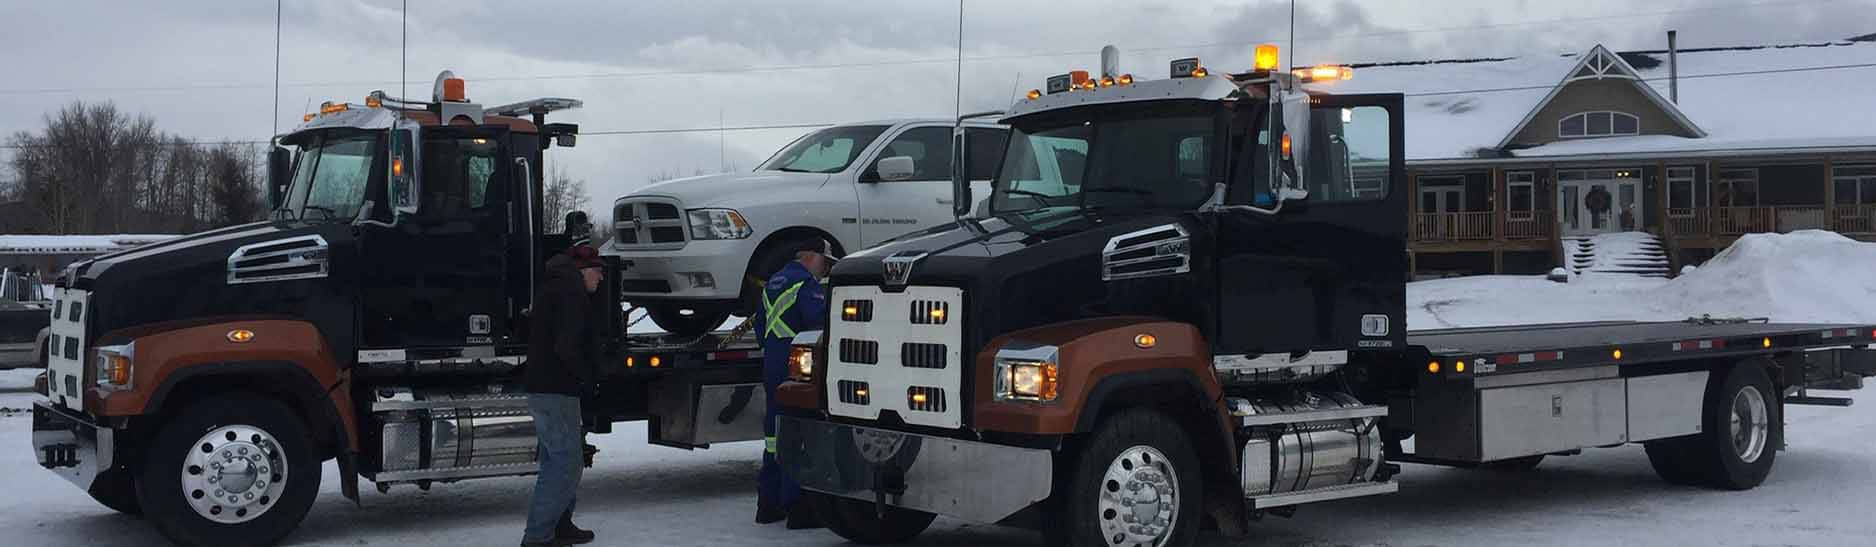 Dawson Creek Towing Service, Tow Truck Service and Towing Company